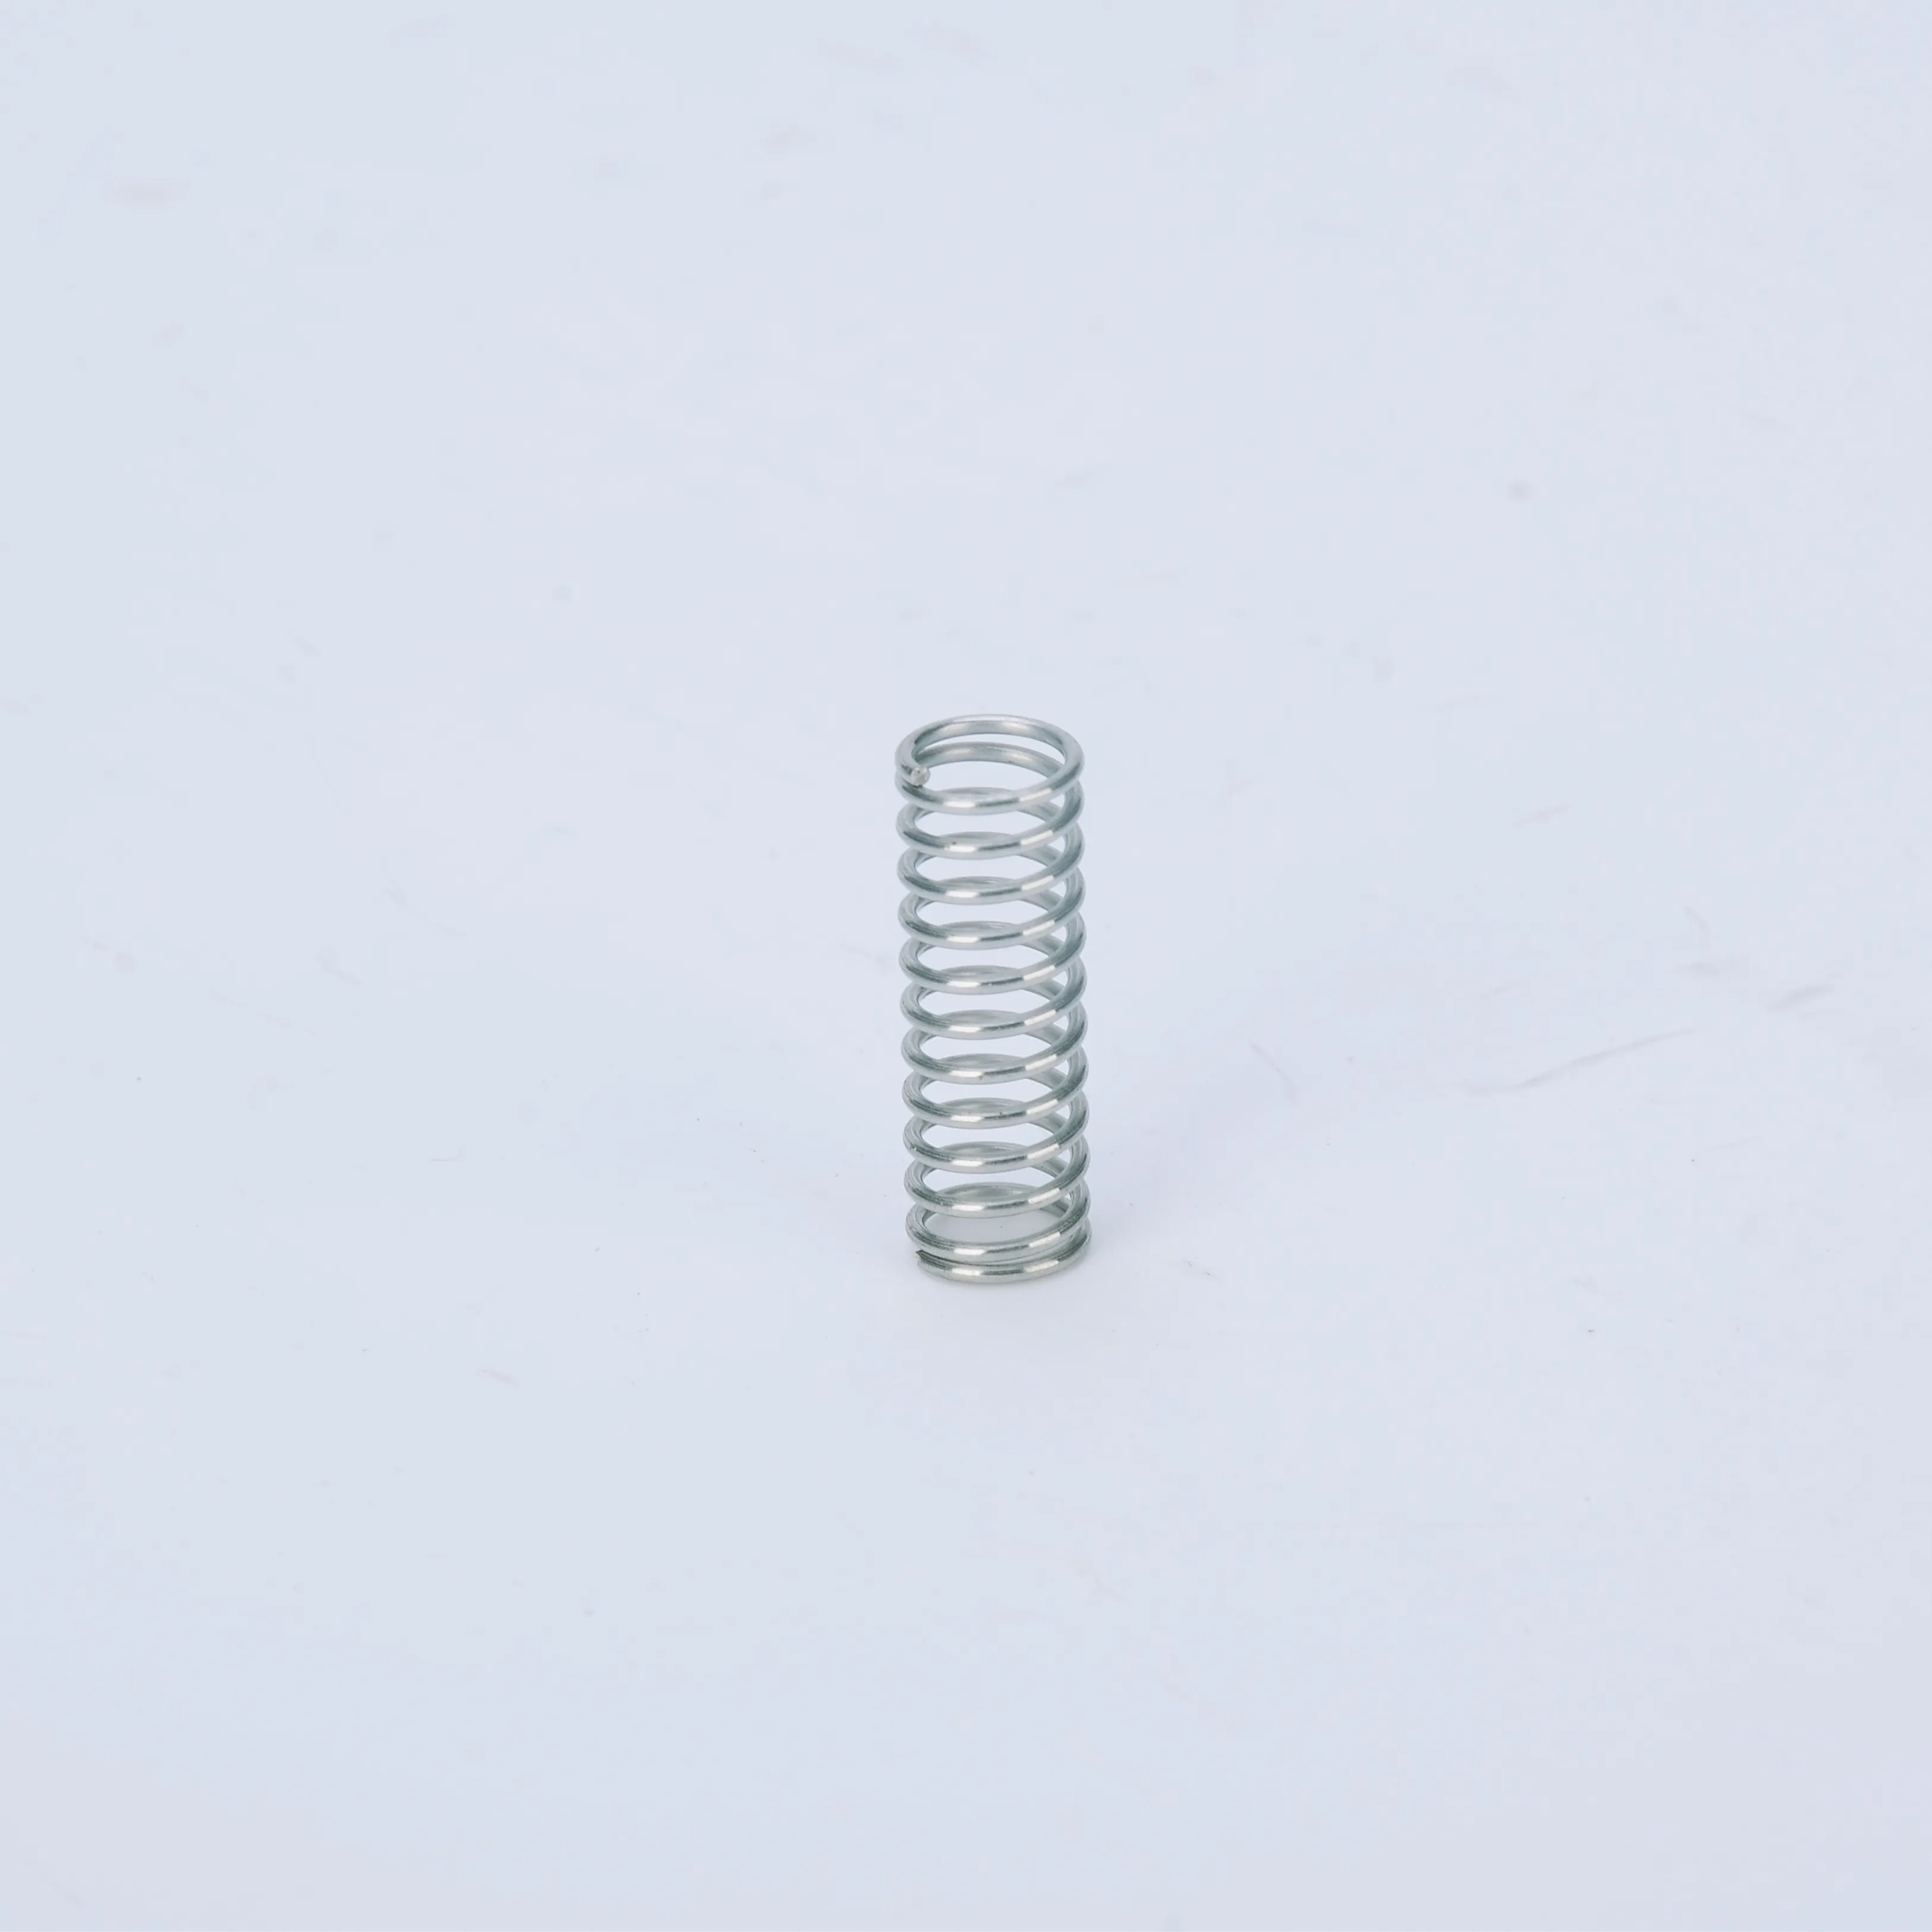 Heli spring customized permanent stainless steel coil compression spring wire